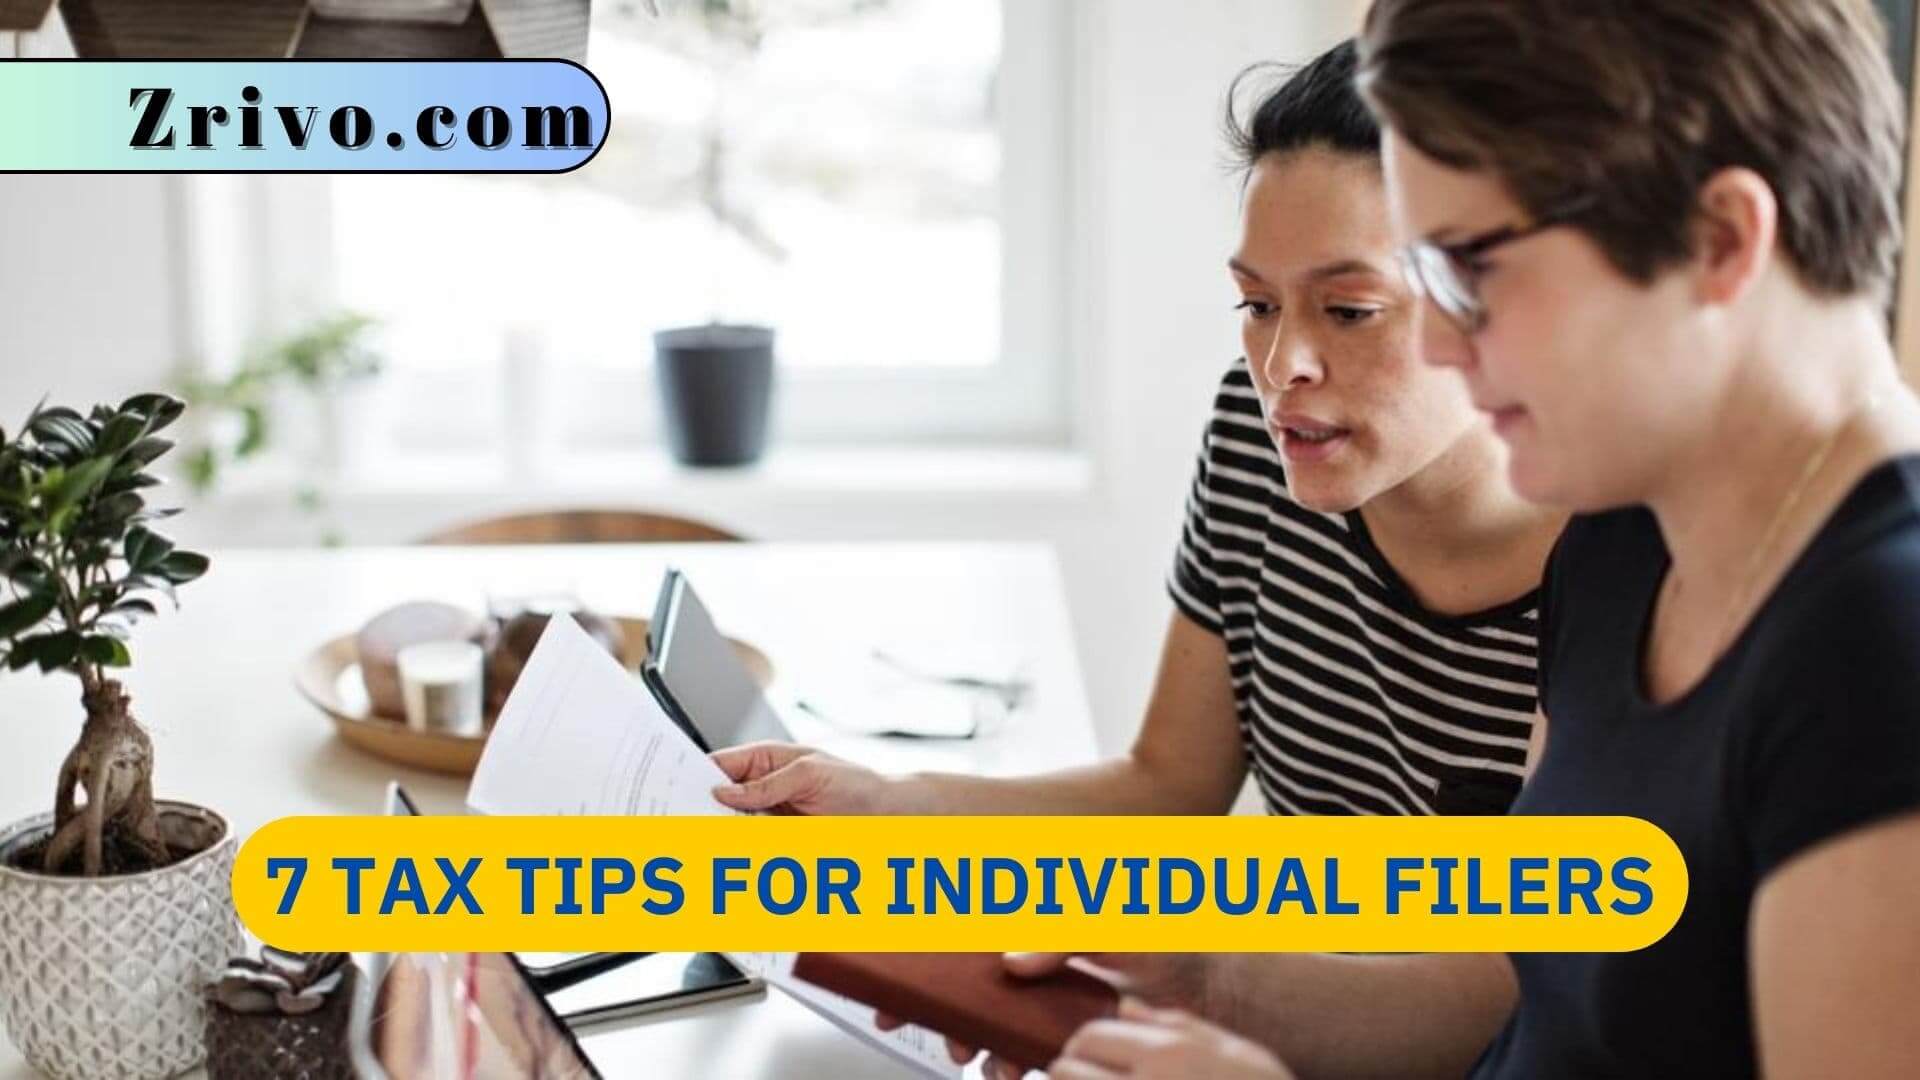 7 Tax Tips for Individual Filers